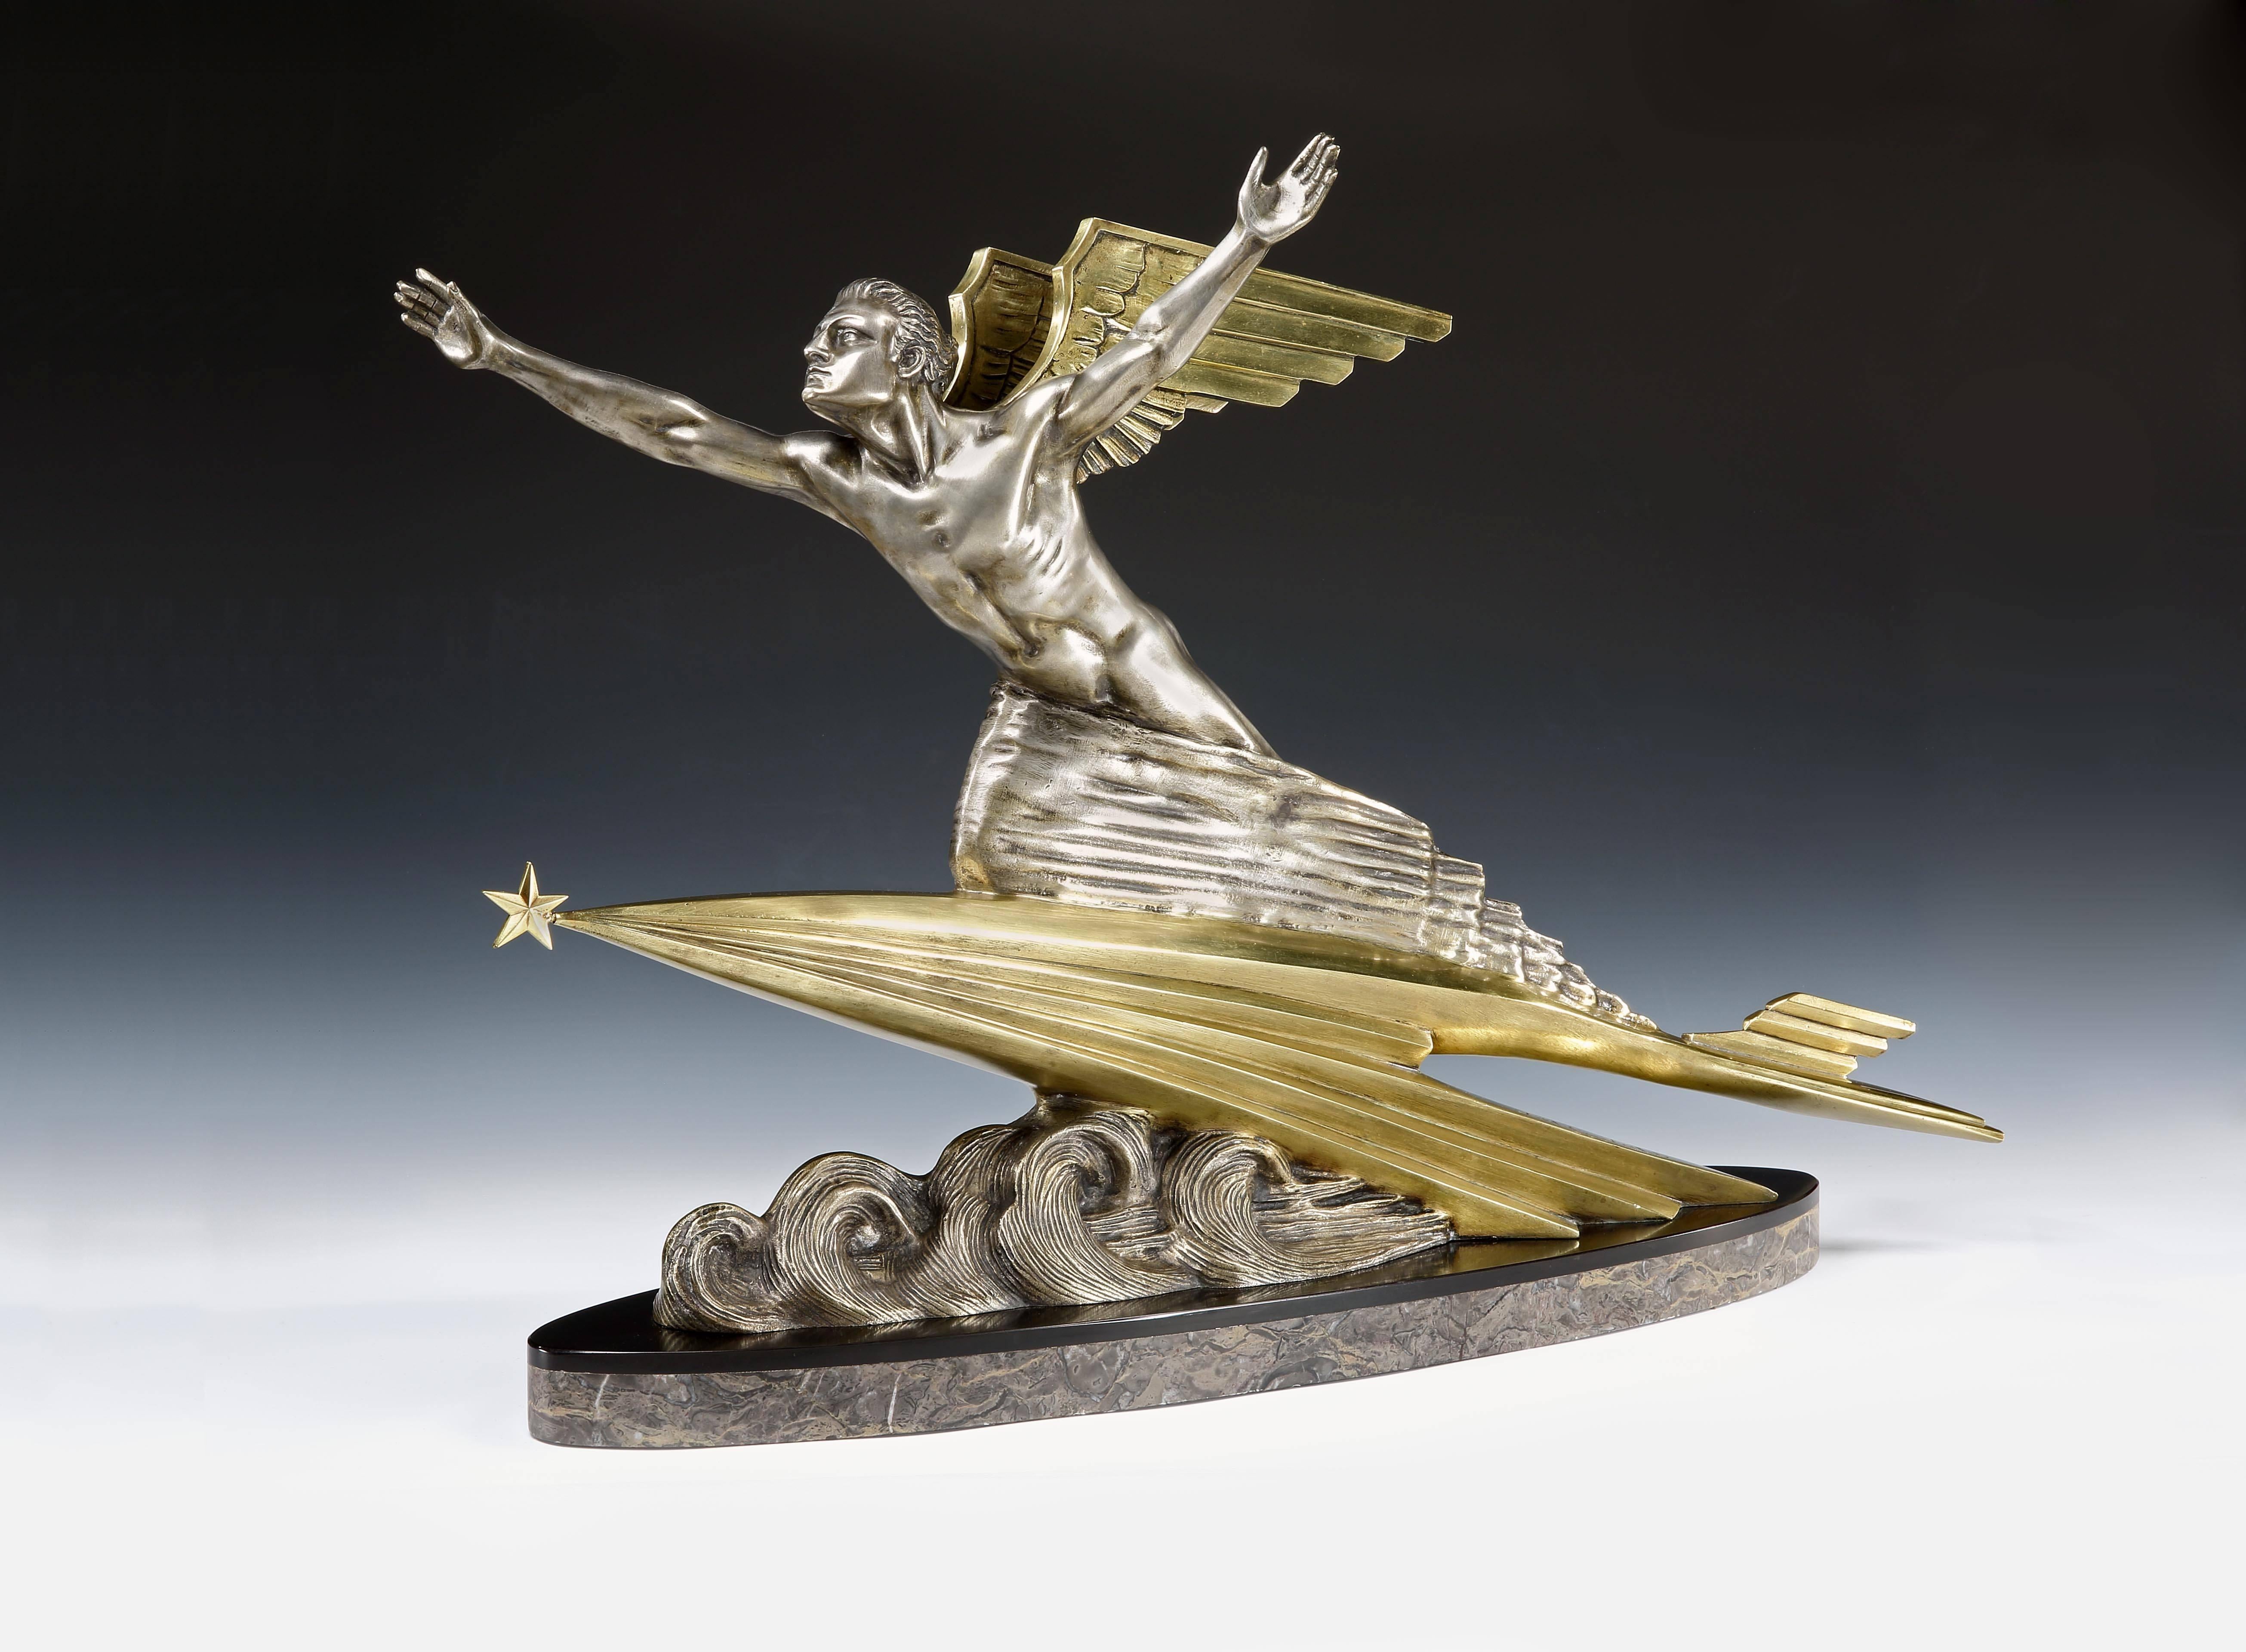 Frederic C. Focht (1879 - 1937)

An extremely atmospheric and evocative Art Deco bronze with silvered and gilded detailing, of a stylized male figure with arms outstretched, riding on top of a Futuristic ‘rocket’ with a crest of swirling clouds